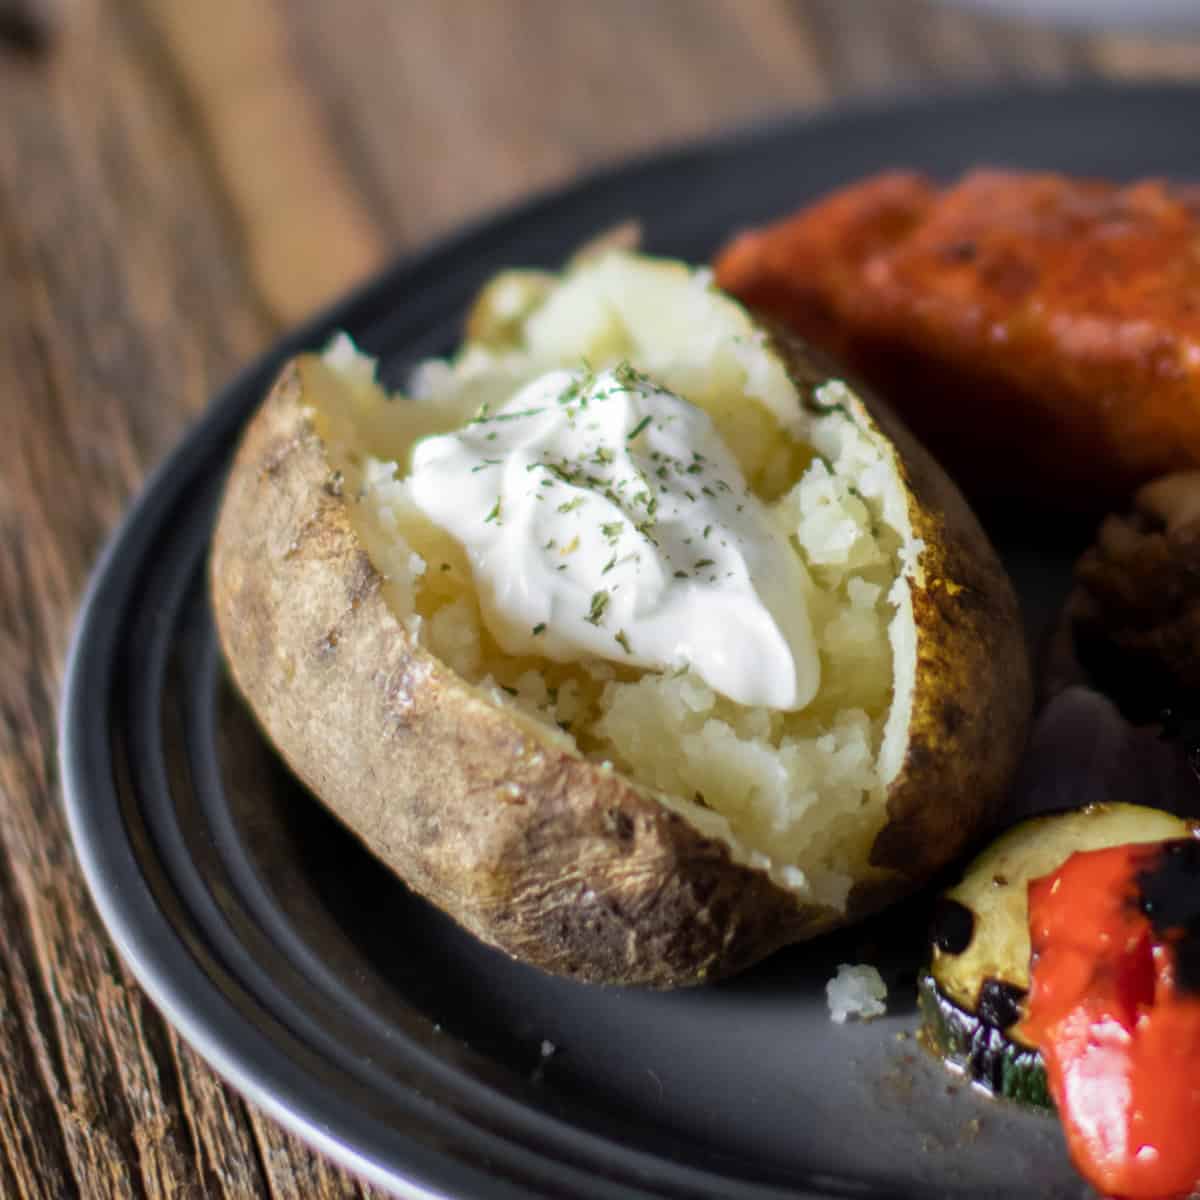 Cooked potato with a spoonful of sour cream on top.